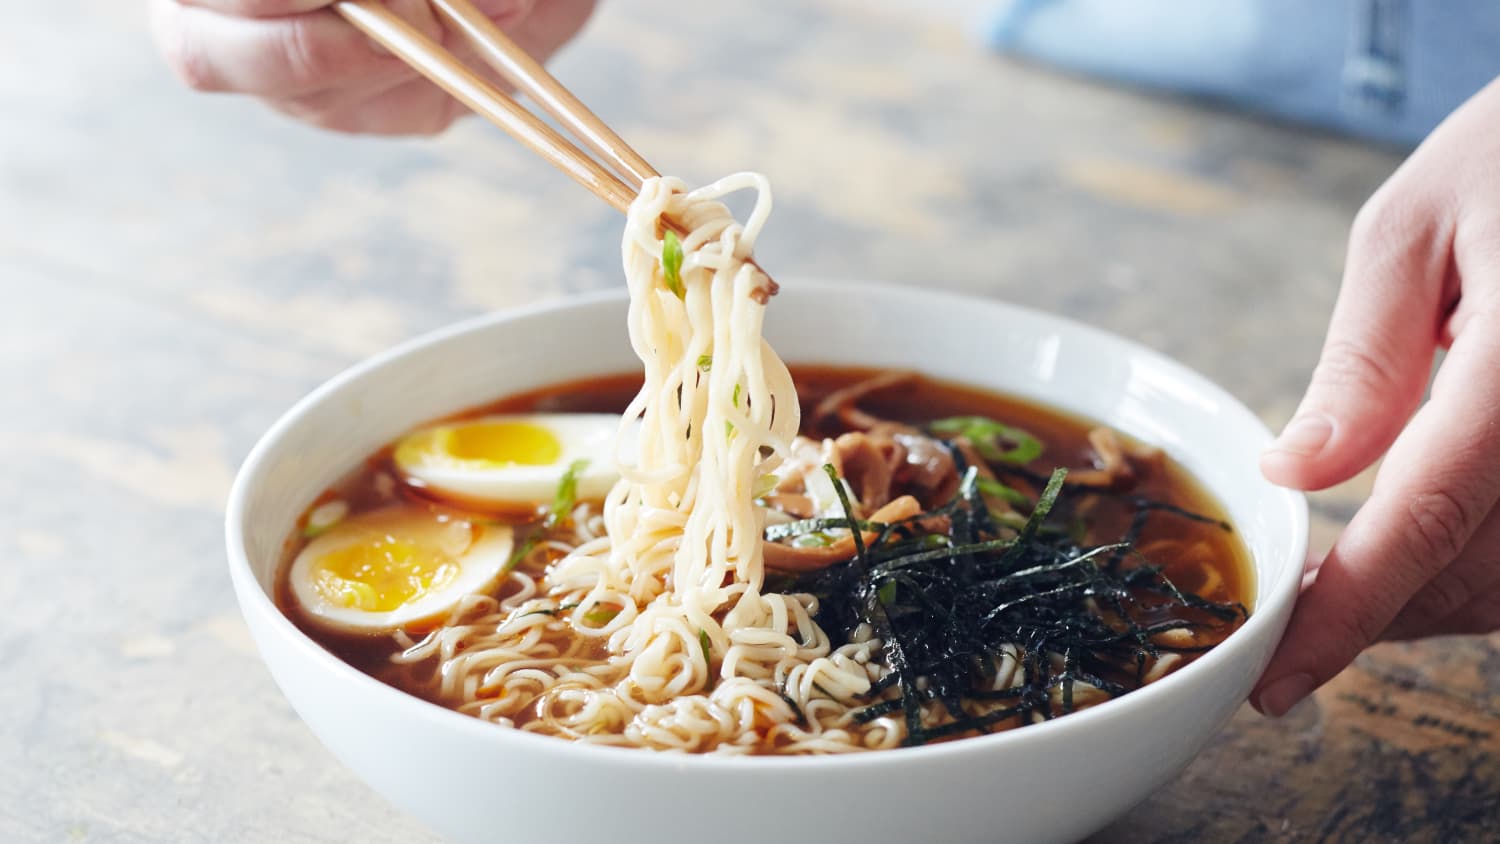 How To Make Homemade Restaurant Quality Ramen Kitchn,20th Wedding Anniversary Party Ideas